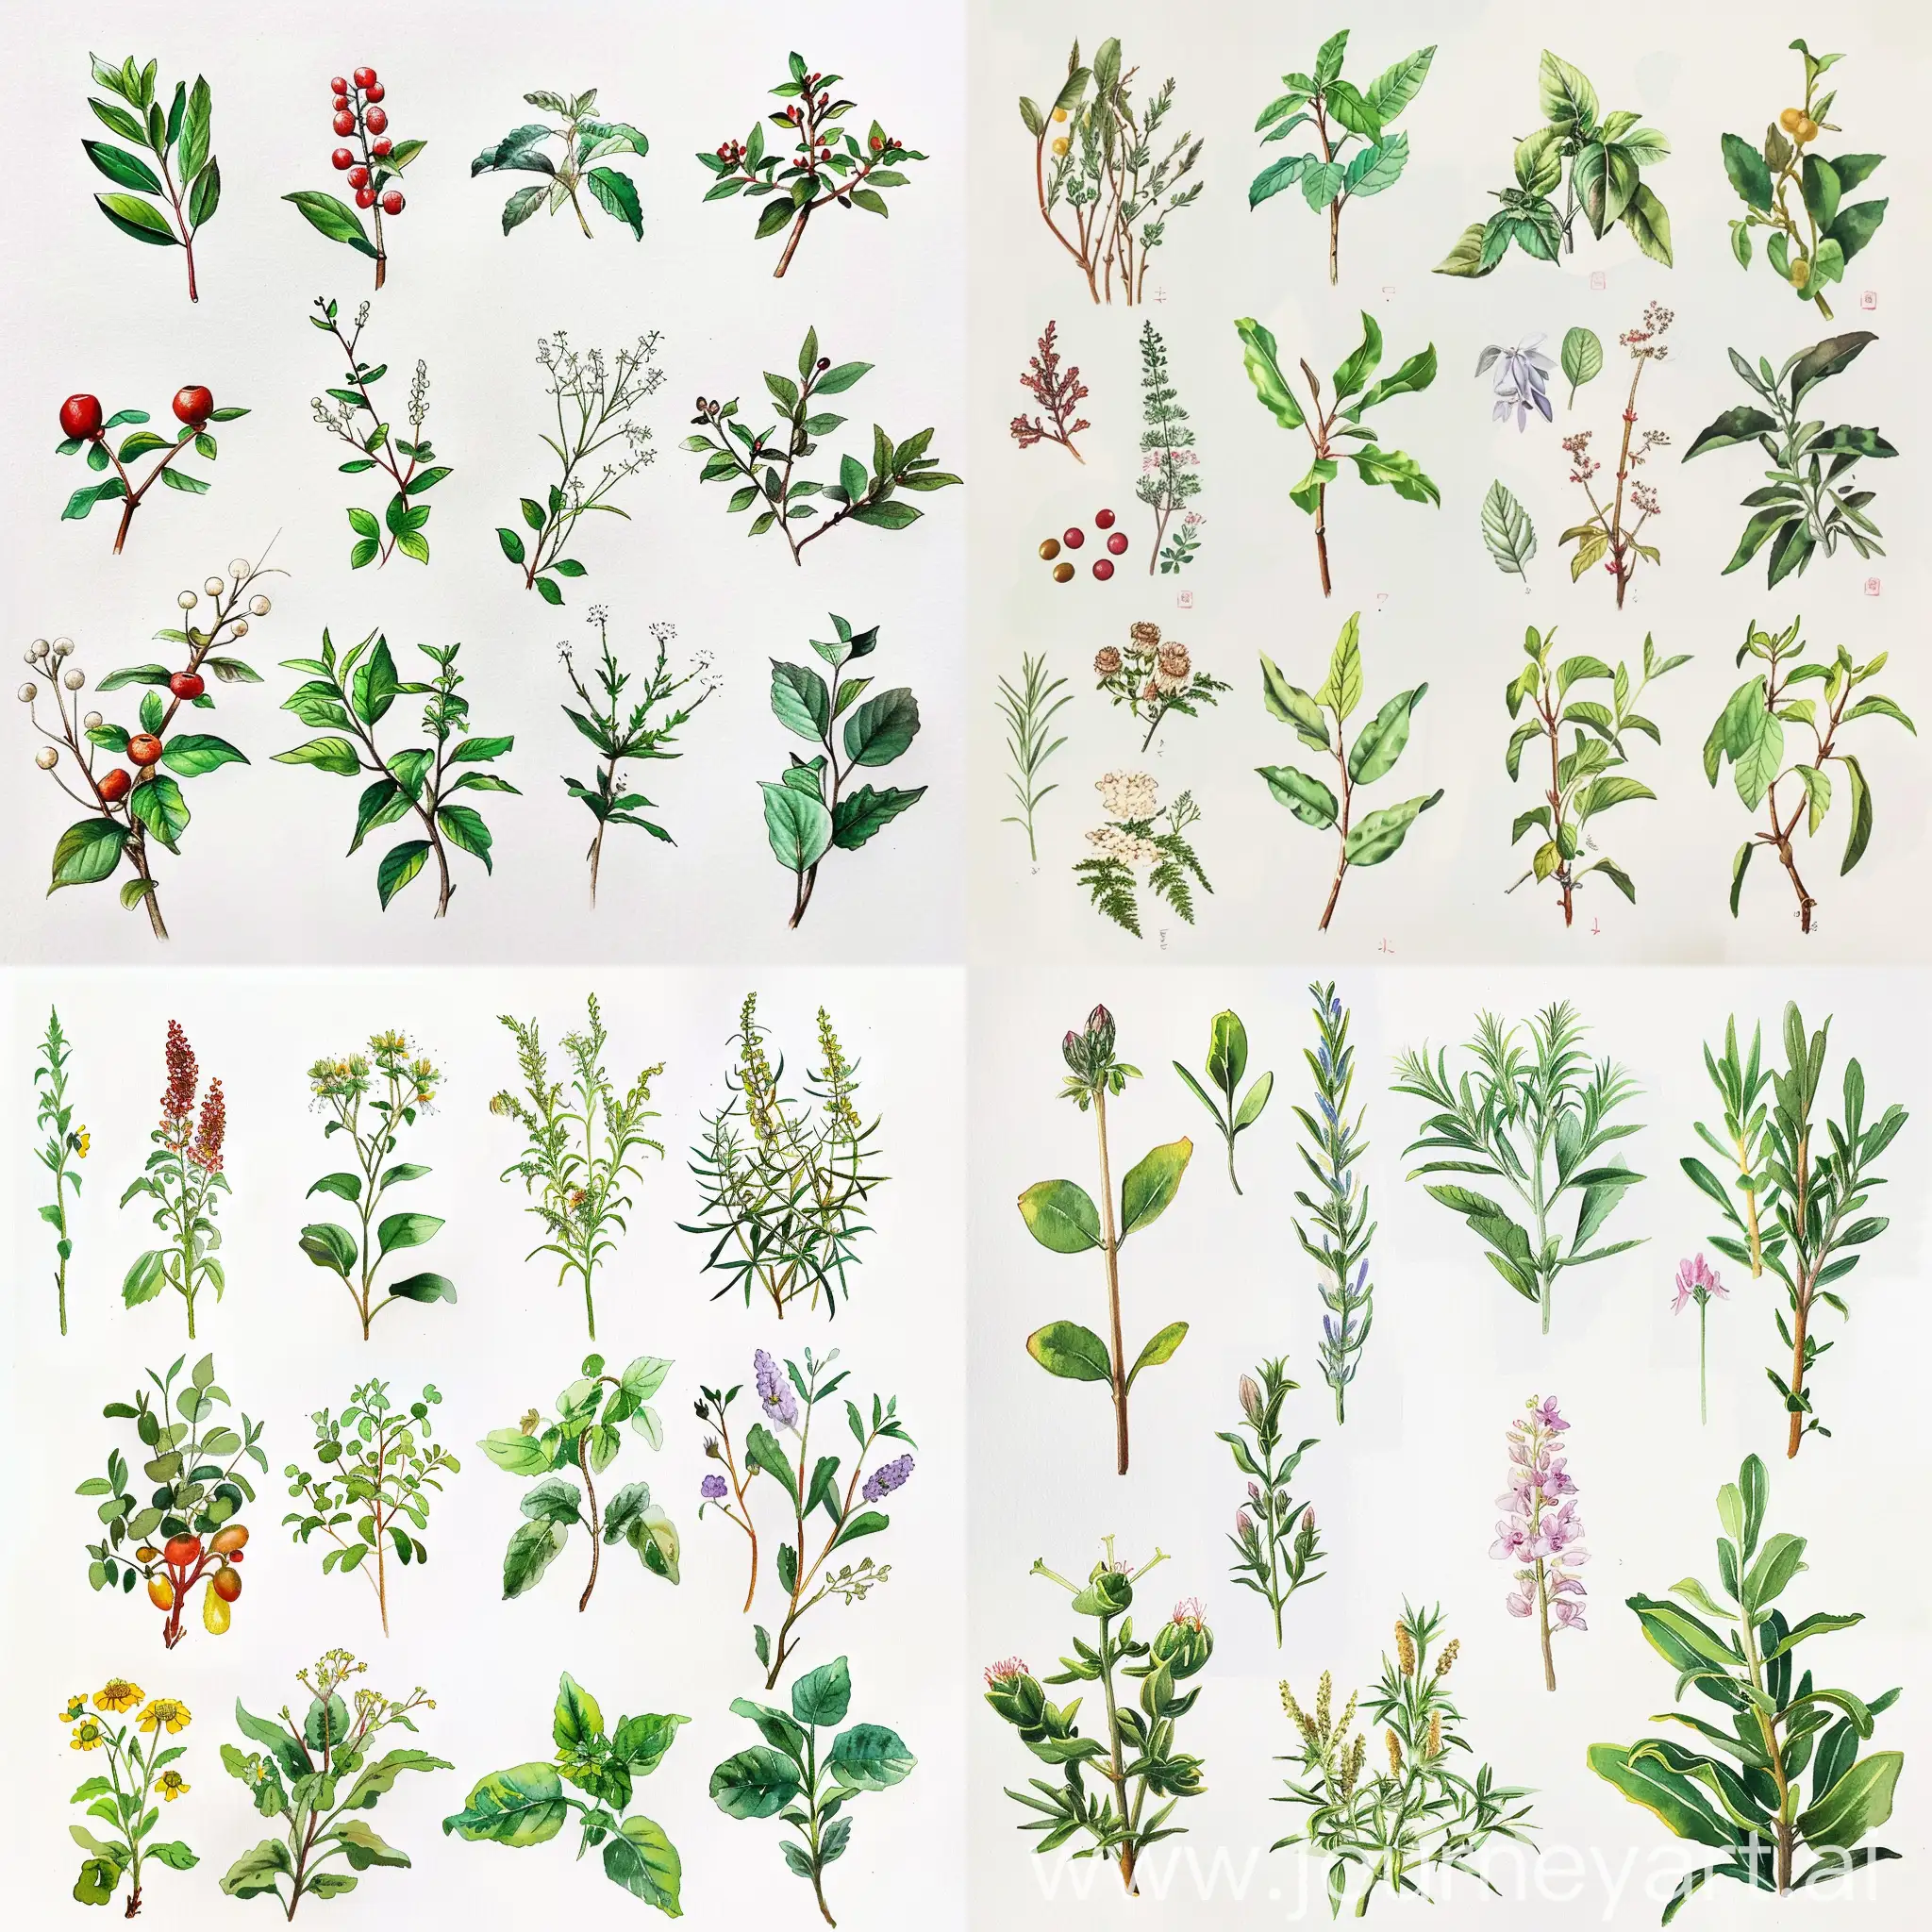 Diverse-Chinese-Herbal-Medicine-Watercolor-Painting